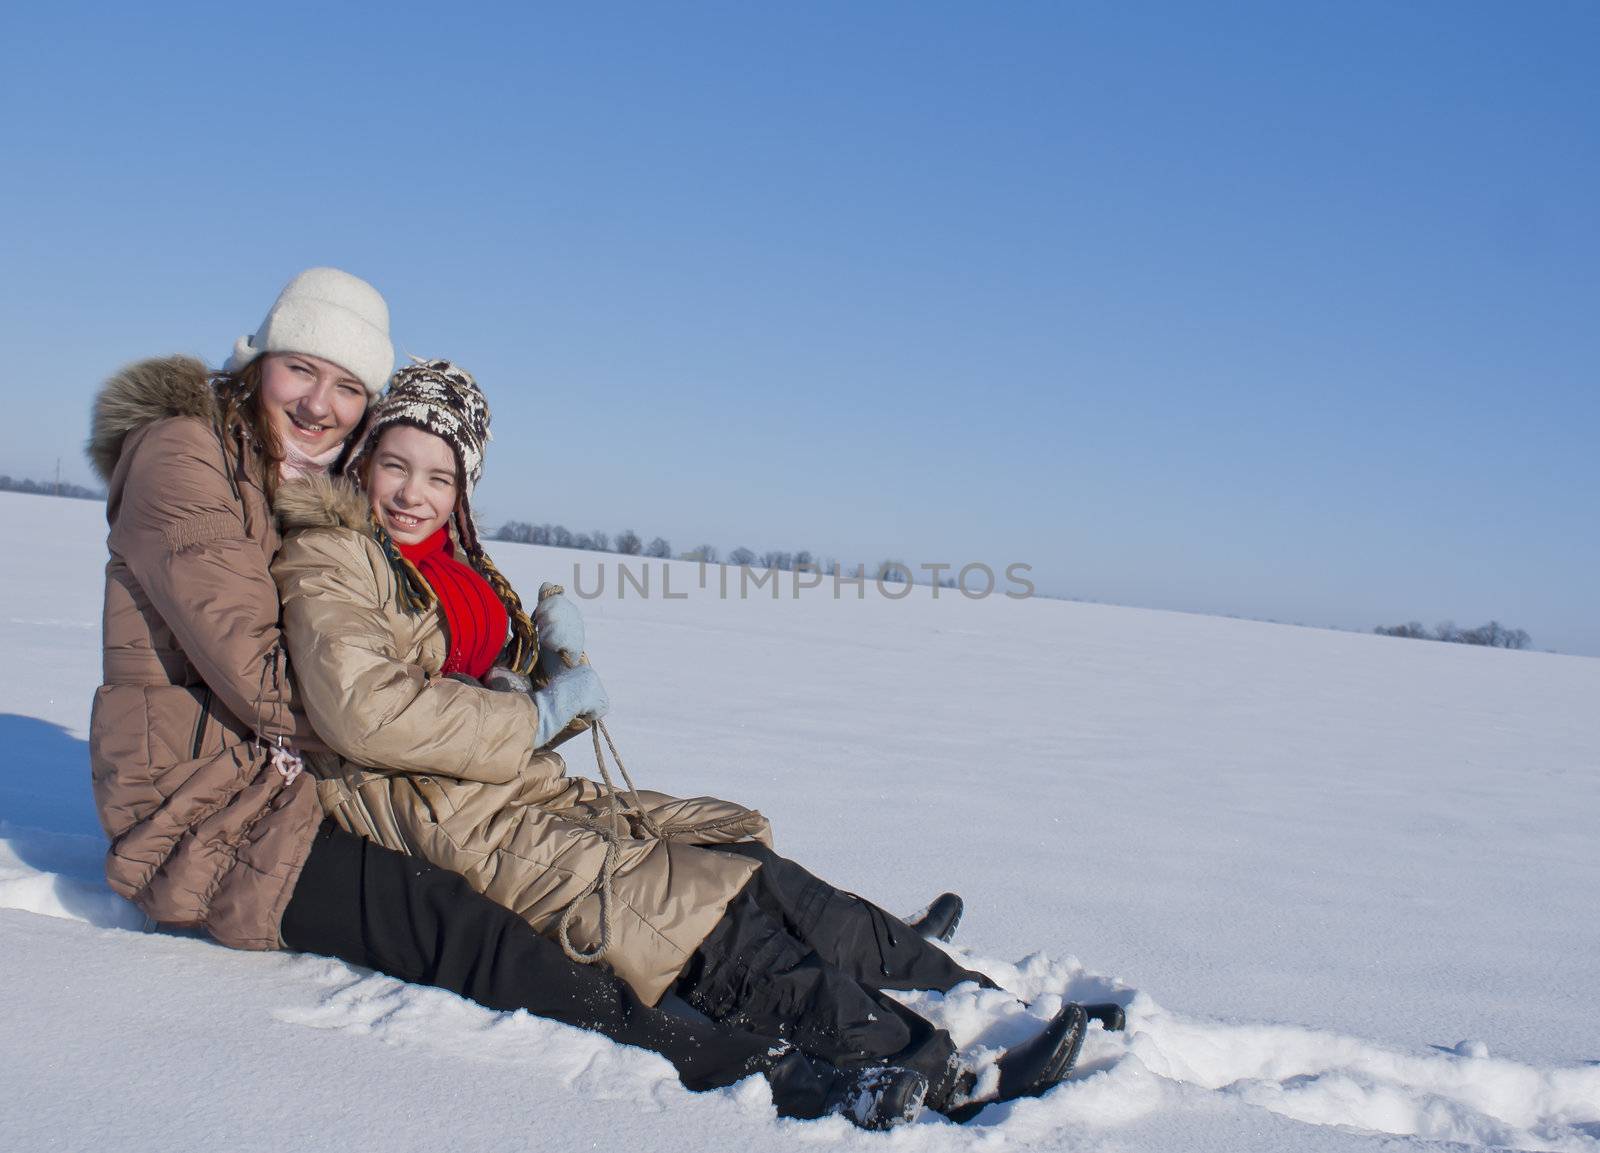 Two happy sisters sledding at winter time by AndreyKr